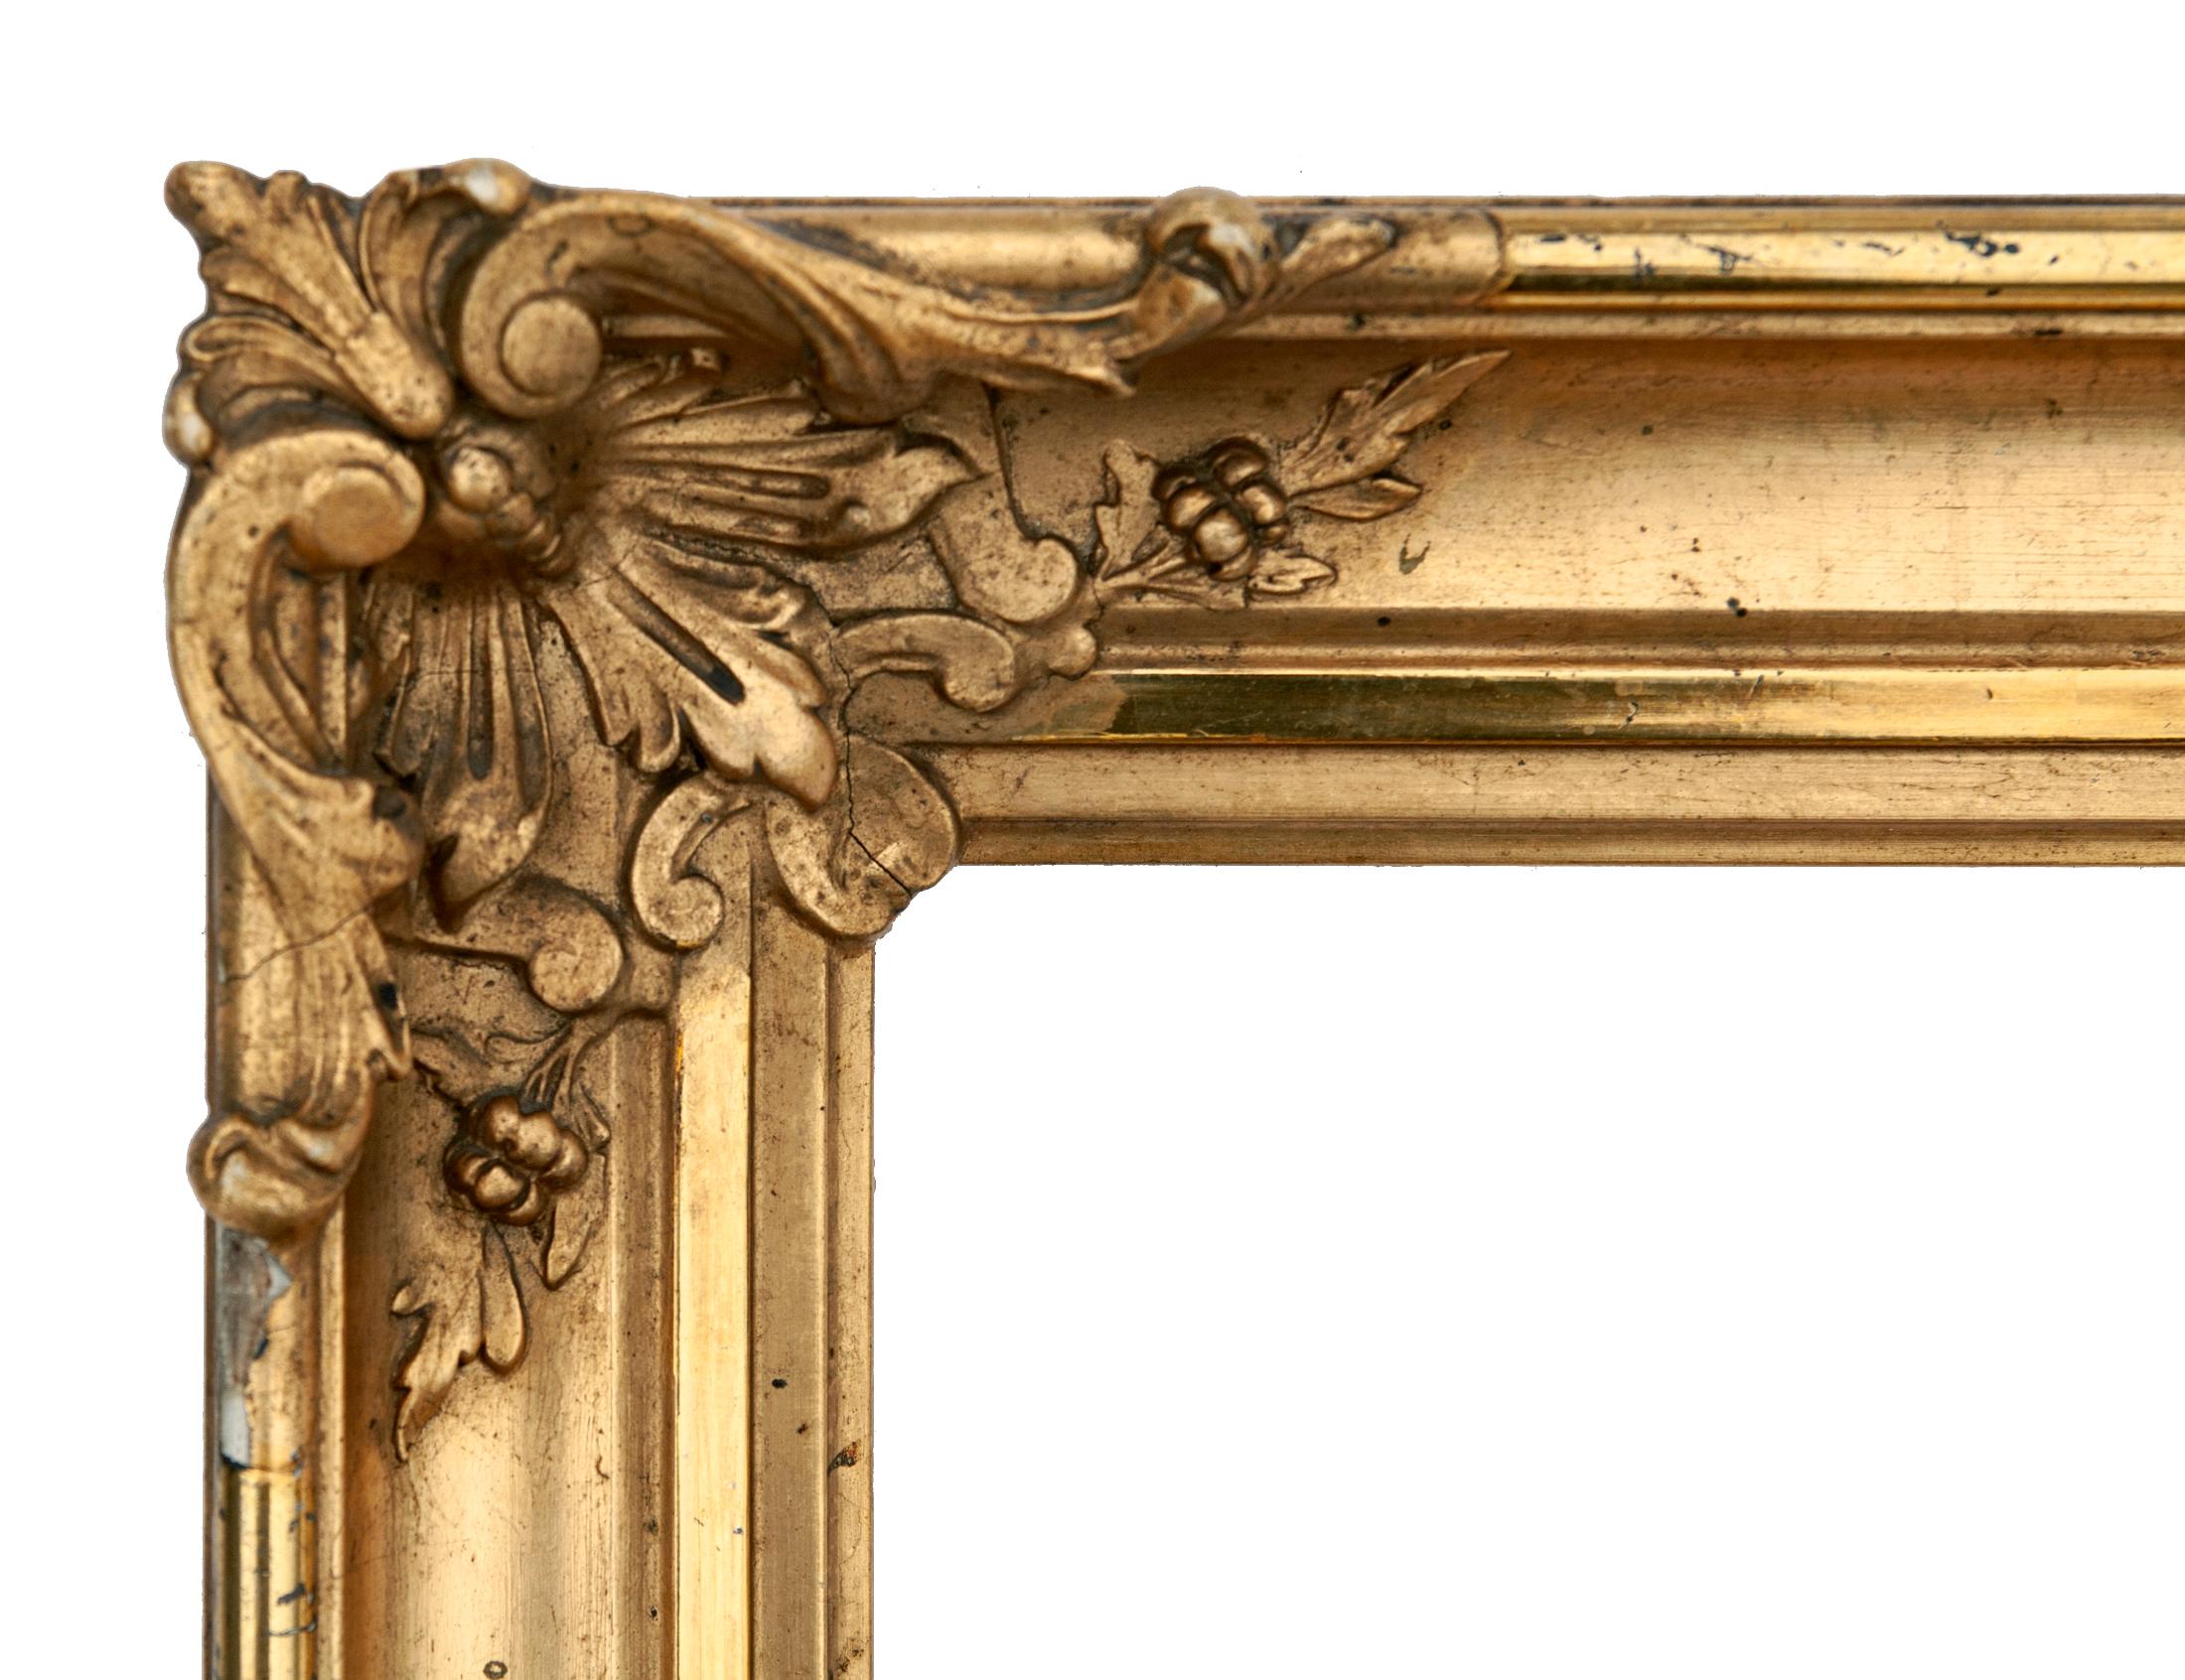 Exquisite late 19thC Swiss/French gilt frame with new beveled mirror.